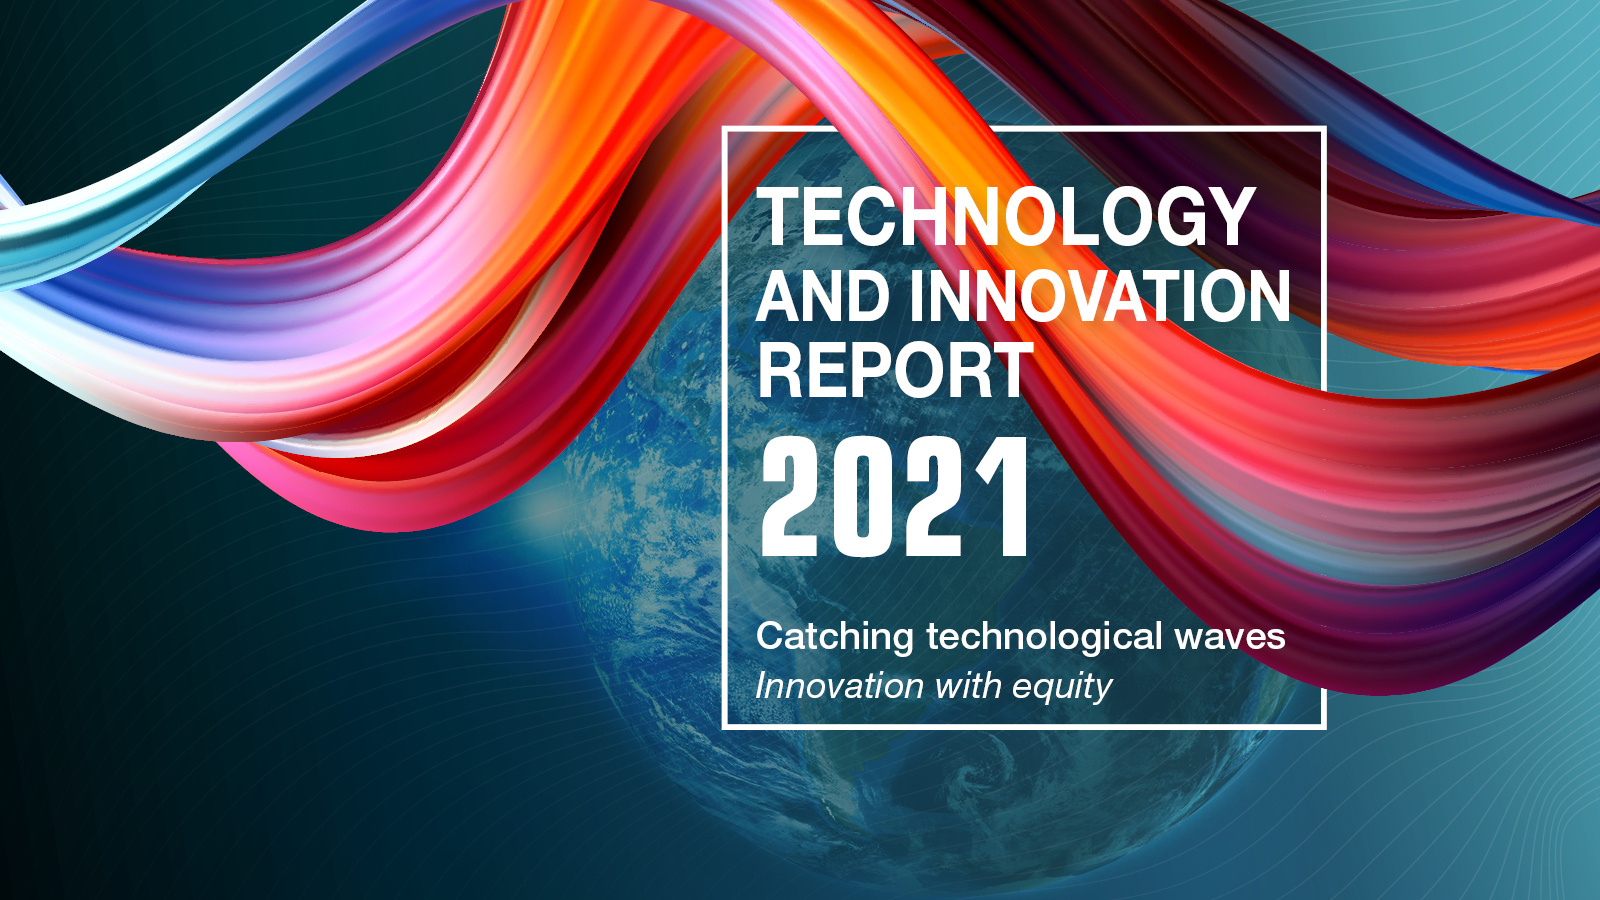 Presentation of the Technology and Innovation Report 2021